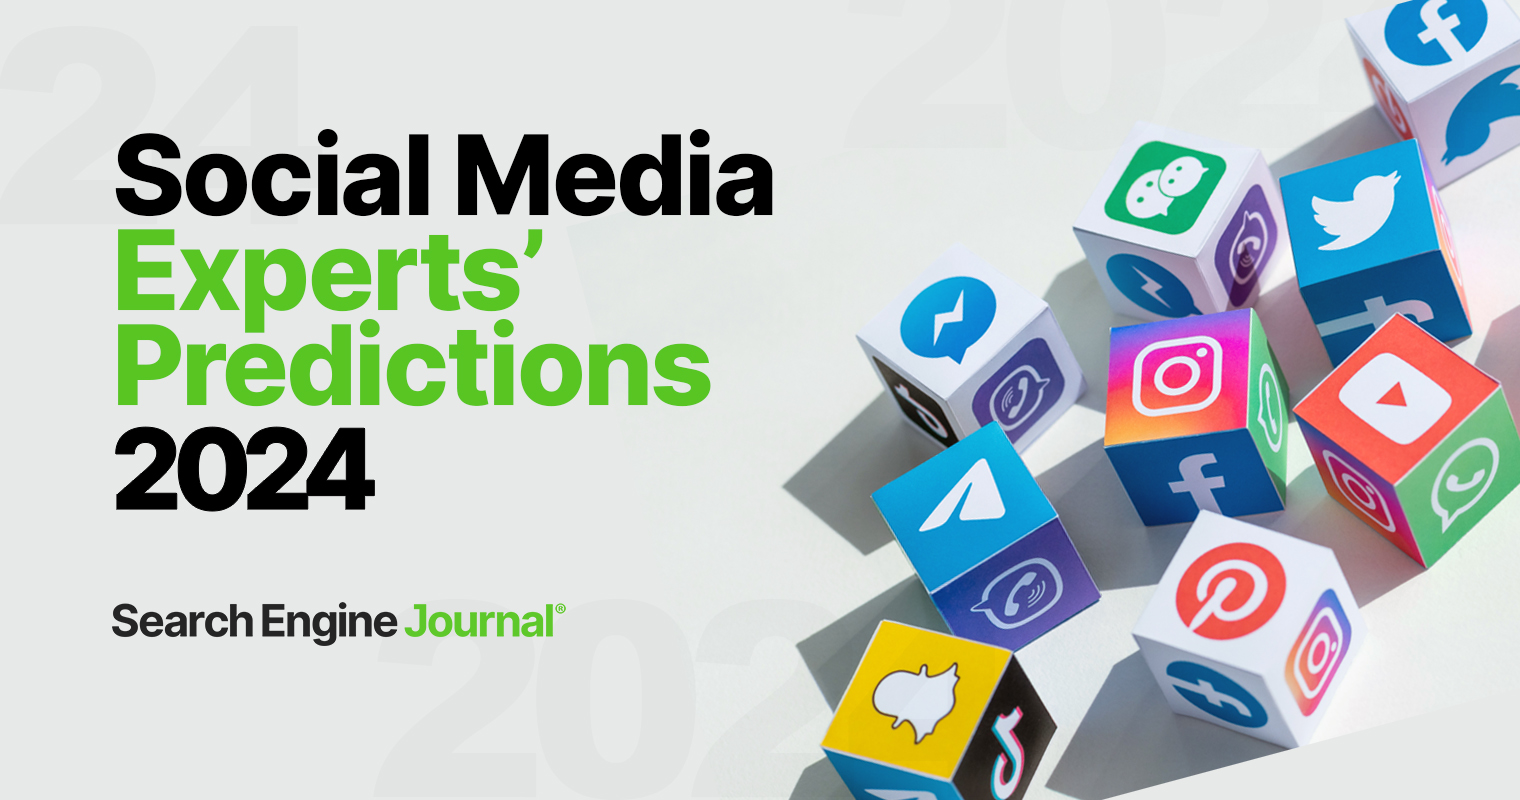 12 Social Media Experts Offer Their Predictions For 2024